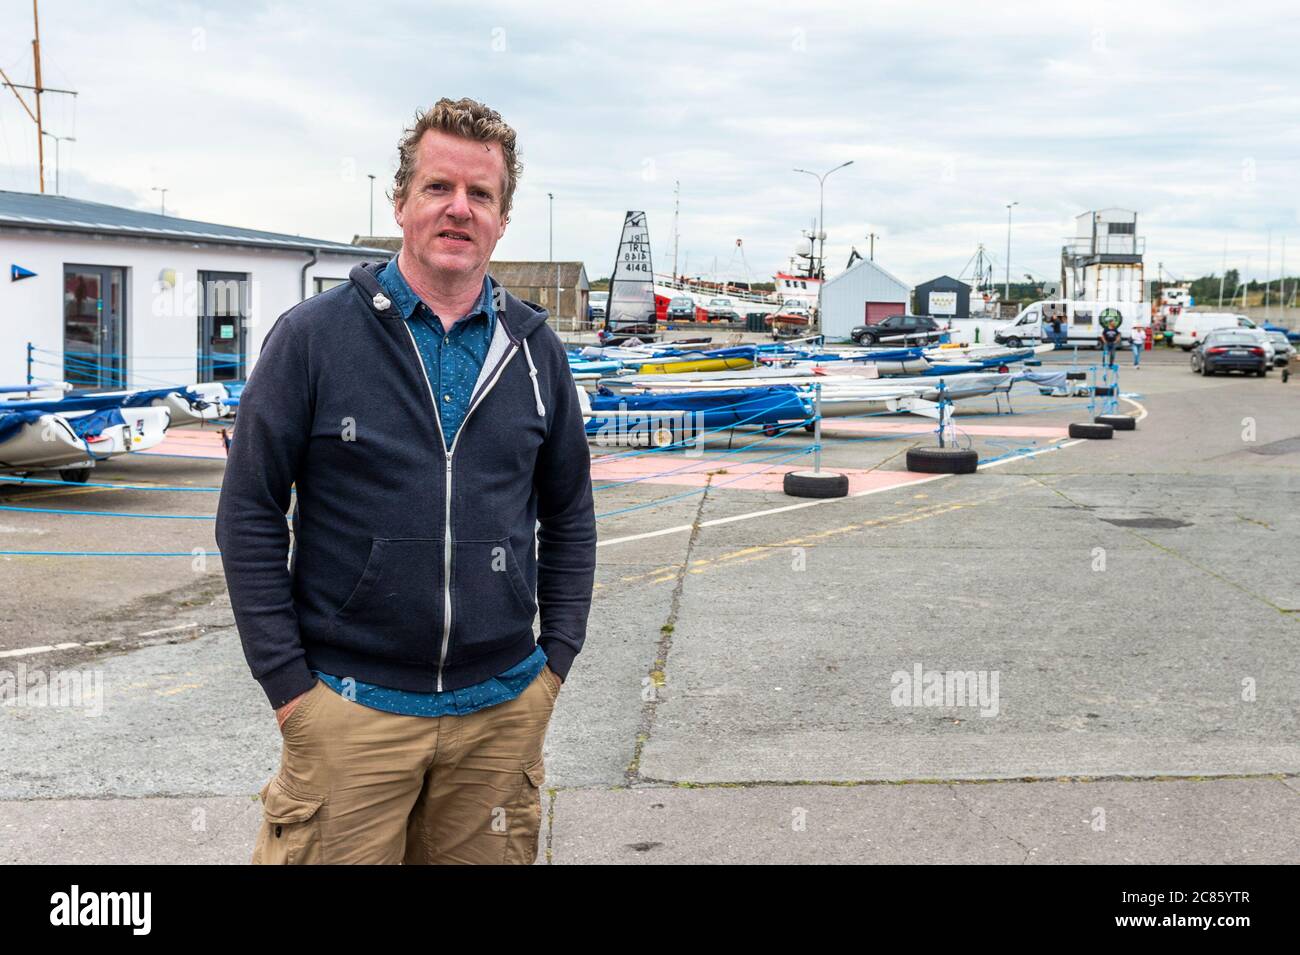 Baltimore, West Cork, Ireland. 21st July, 2020. Political Correspondent for RTE Television, Paul Cunnigham, was spotted in Baltimore today. Paul is on holiday with his wife and son in the popular West Cork holiday destination. Credit: AG News/Alamy Live News Stock Photo